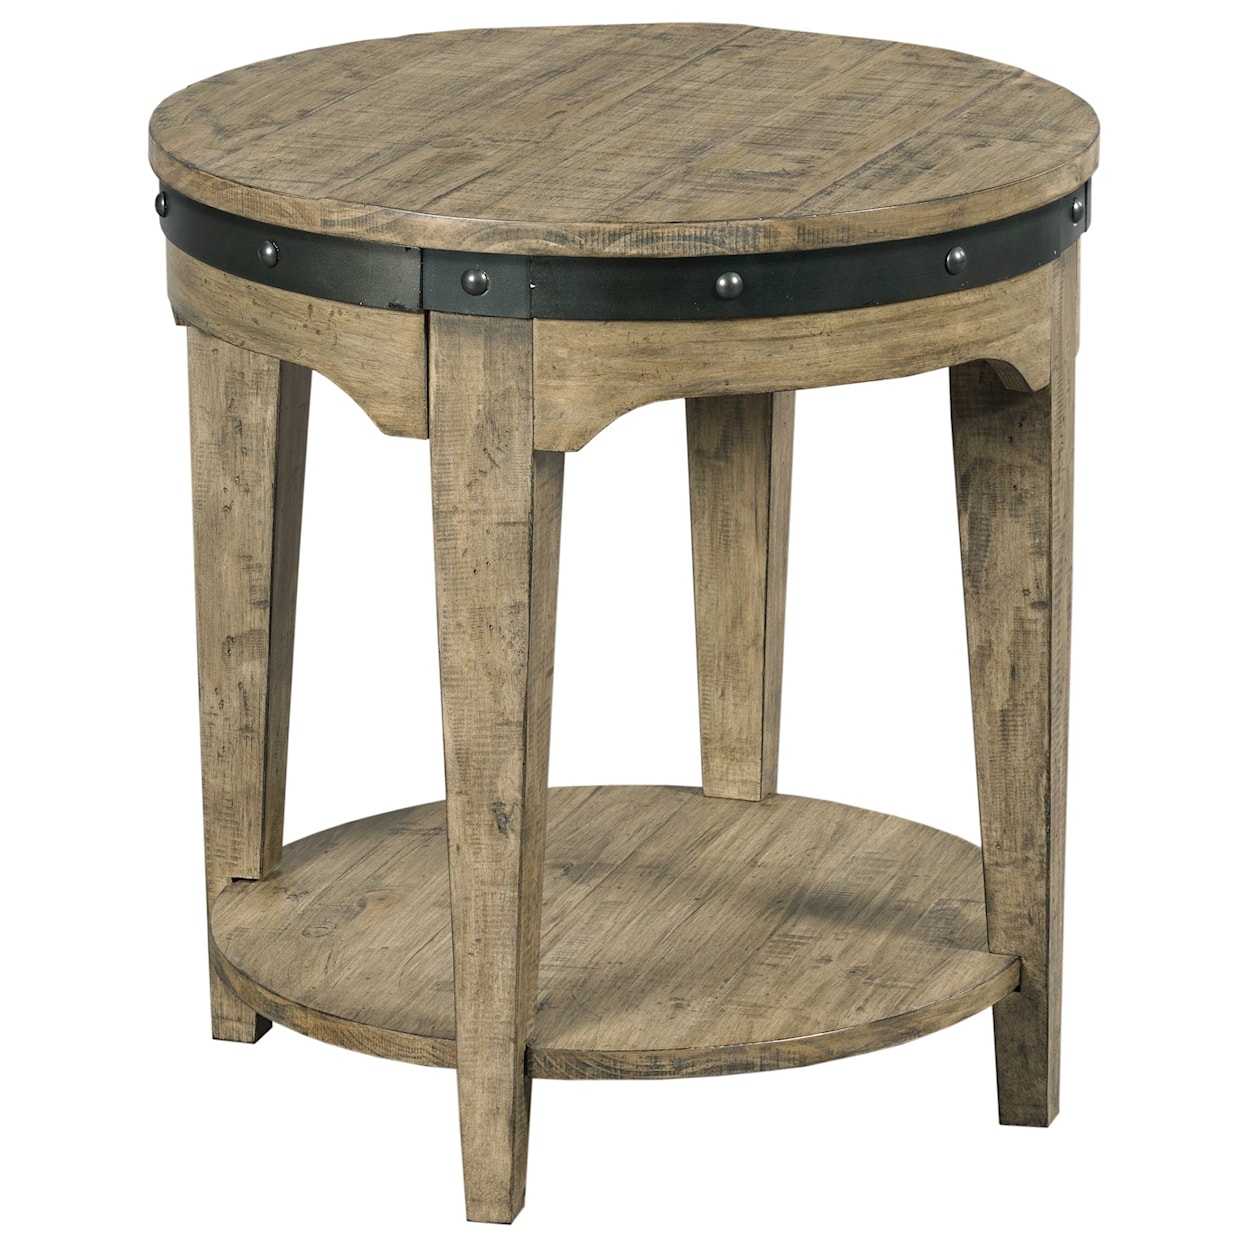 Kincaid Furniture Plank Road Artisans Round End Table                    